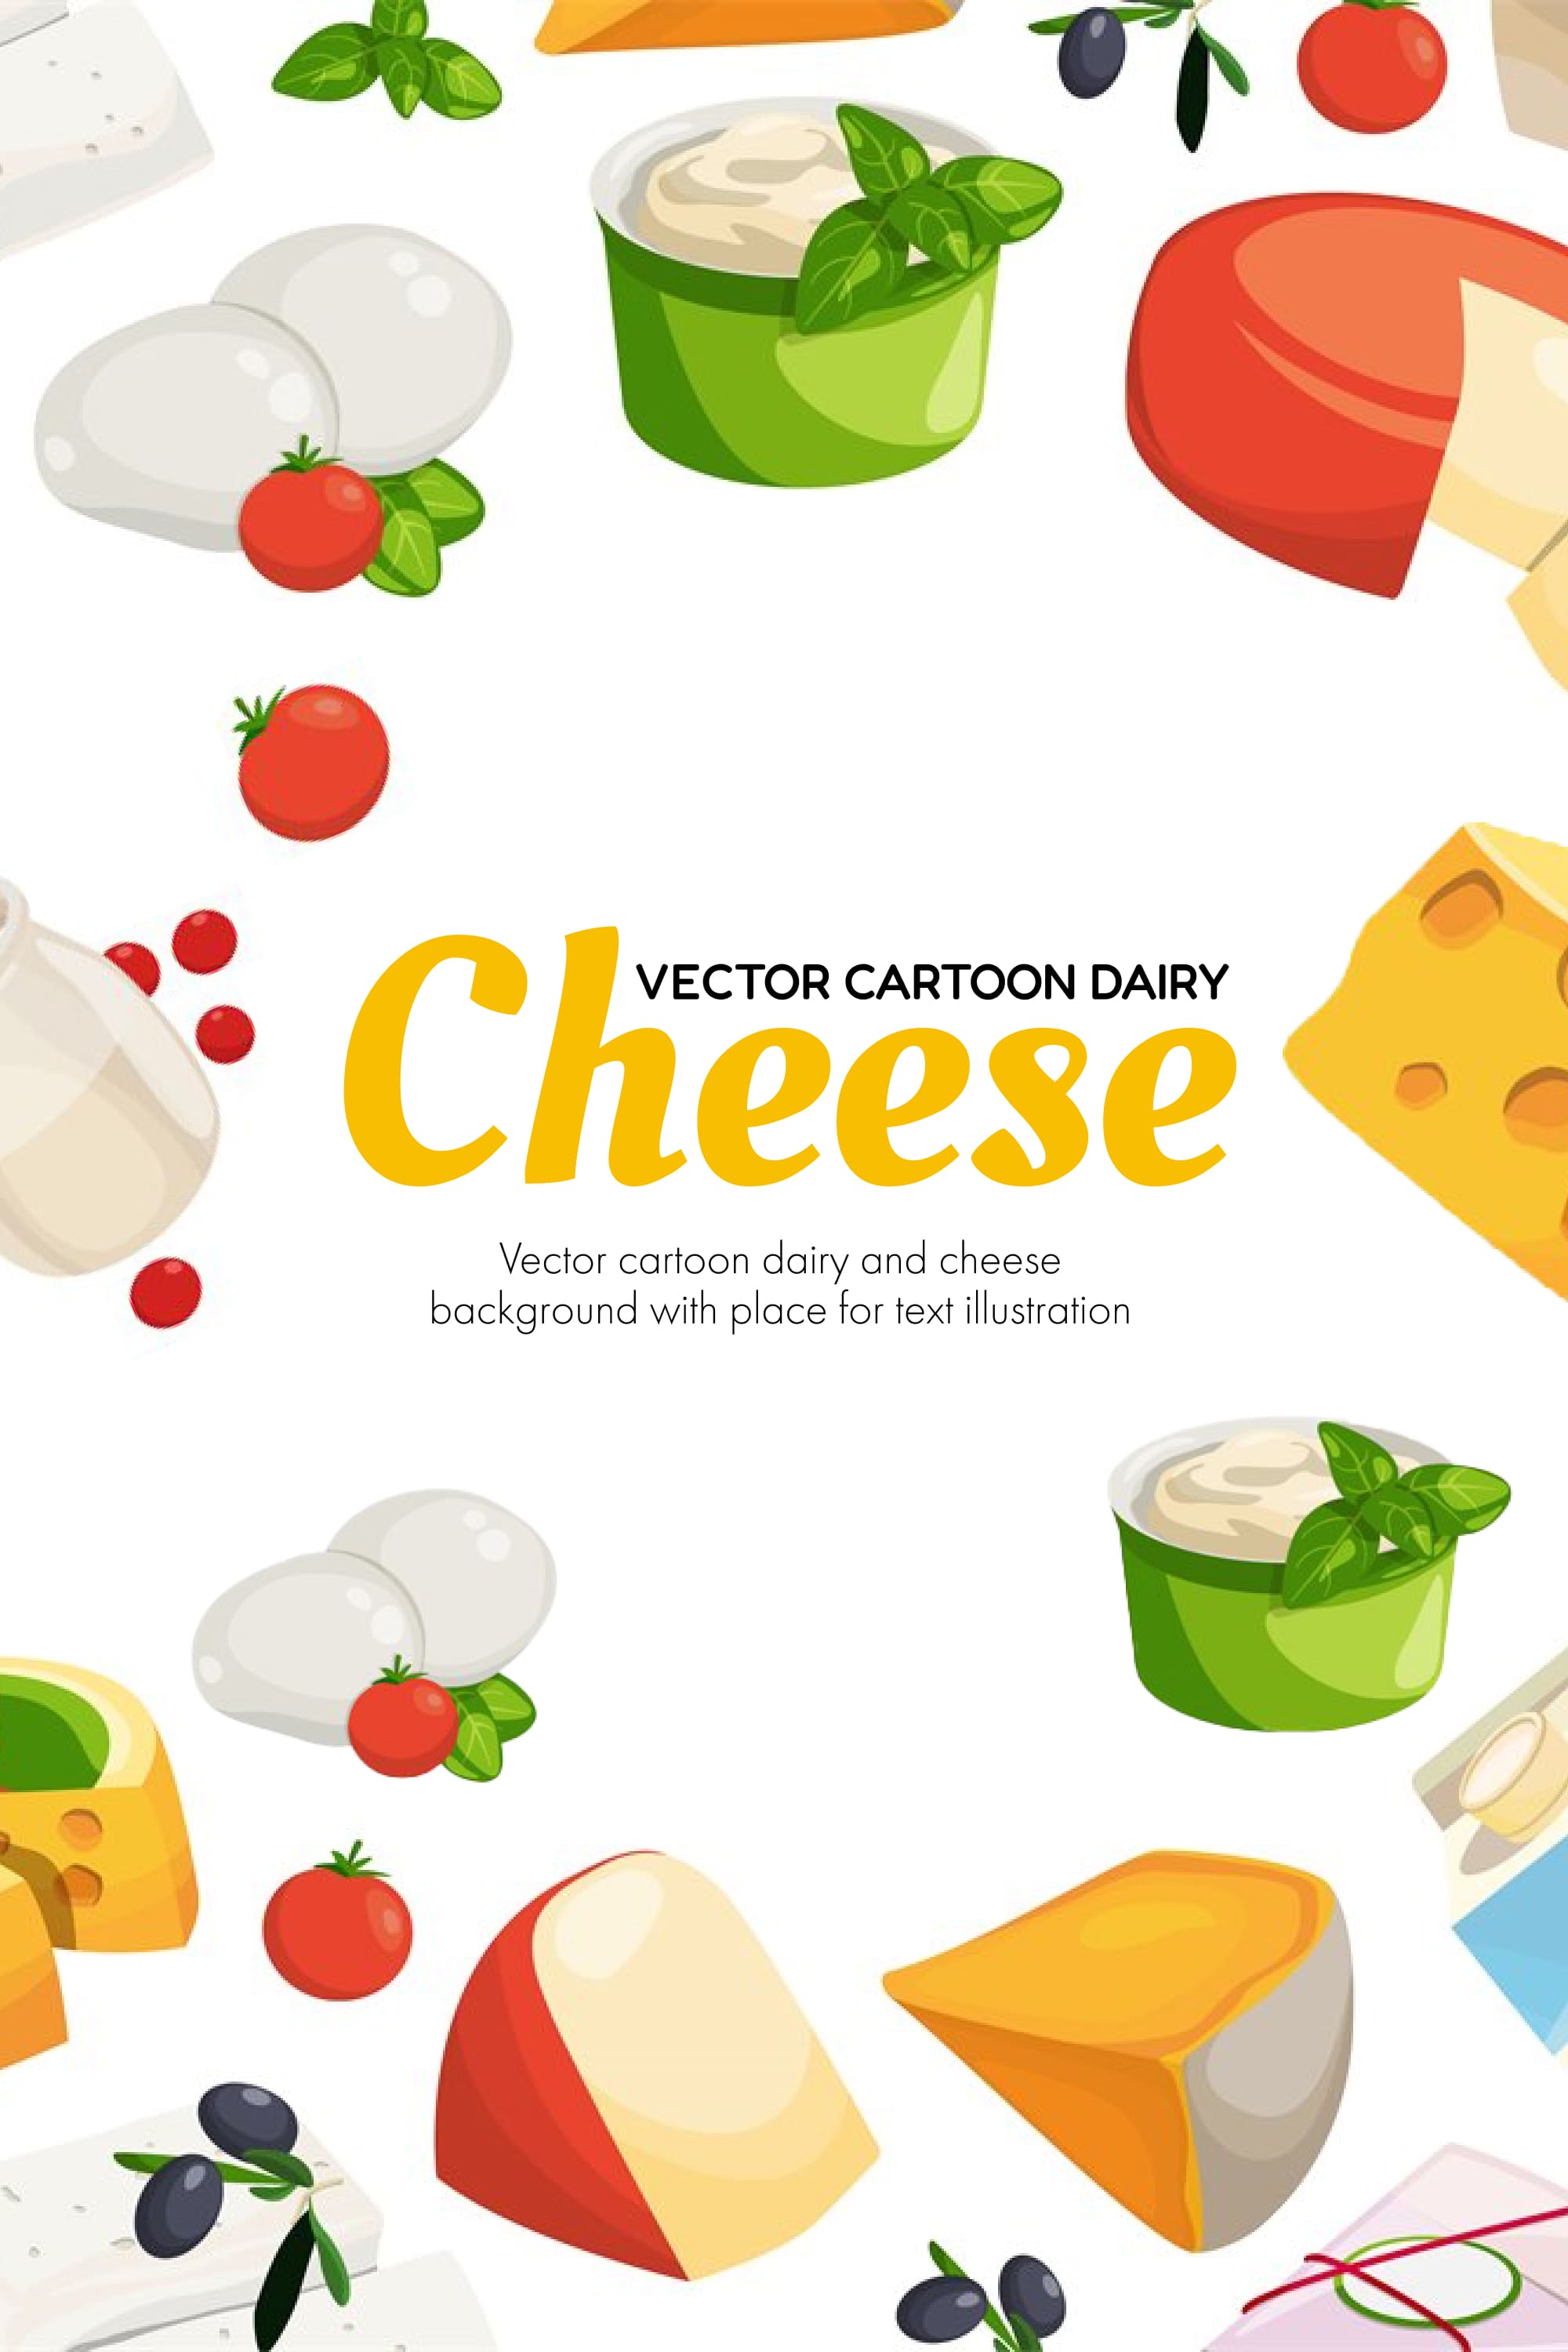 Colorful vector cartoon image of milk and cheese.